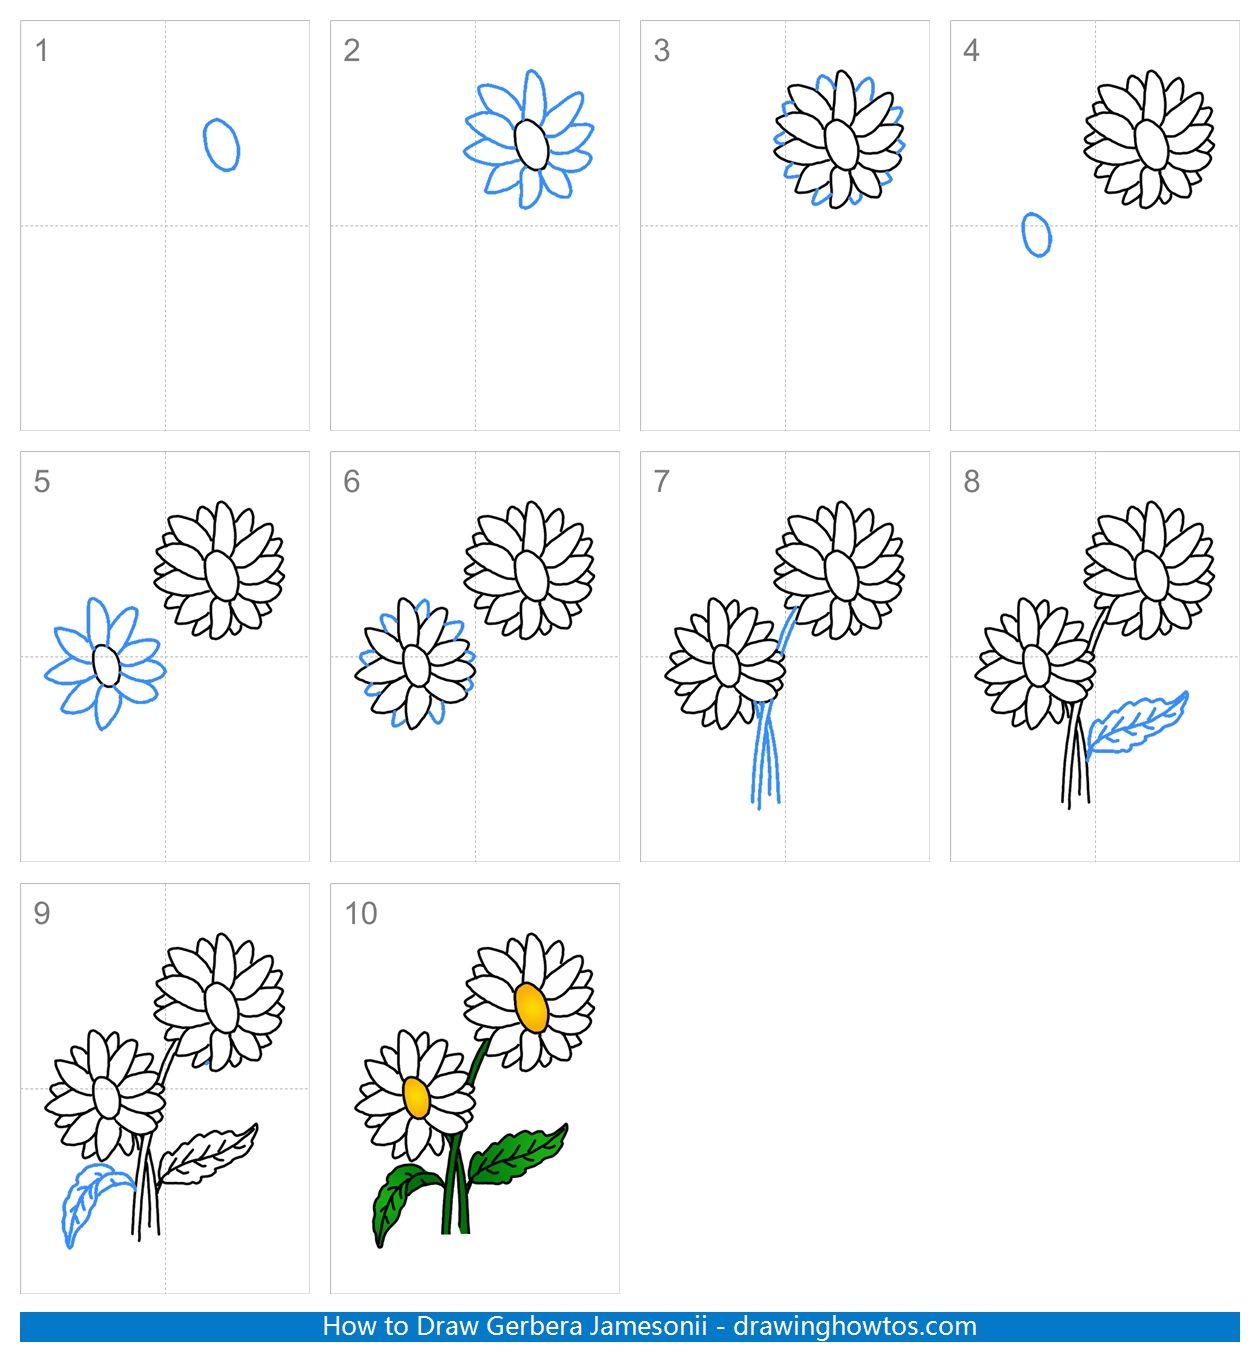 How to Draw Gerbera Daisy Flowers Step by Step Easy Drawing Guides